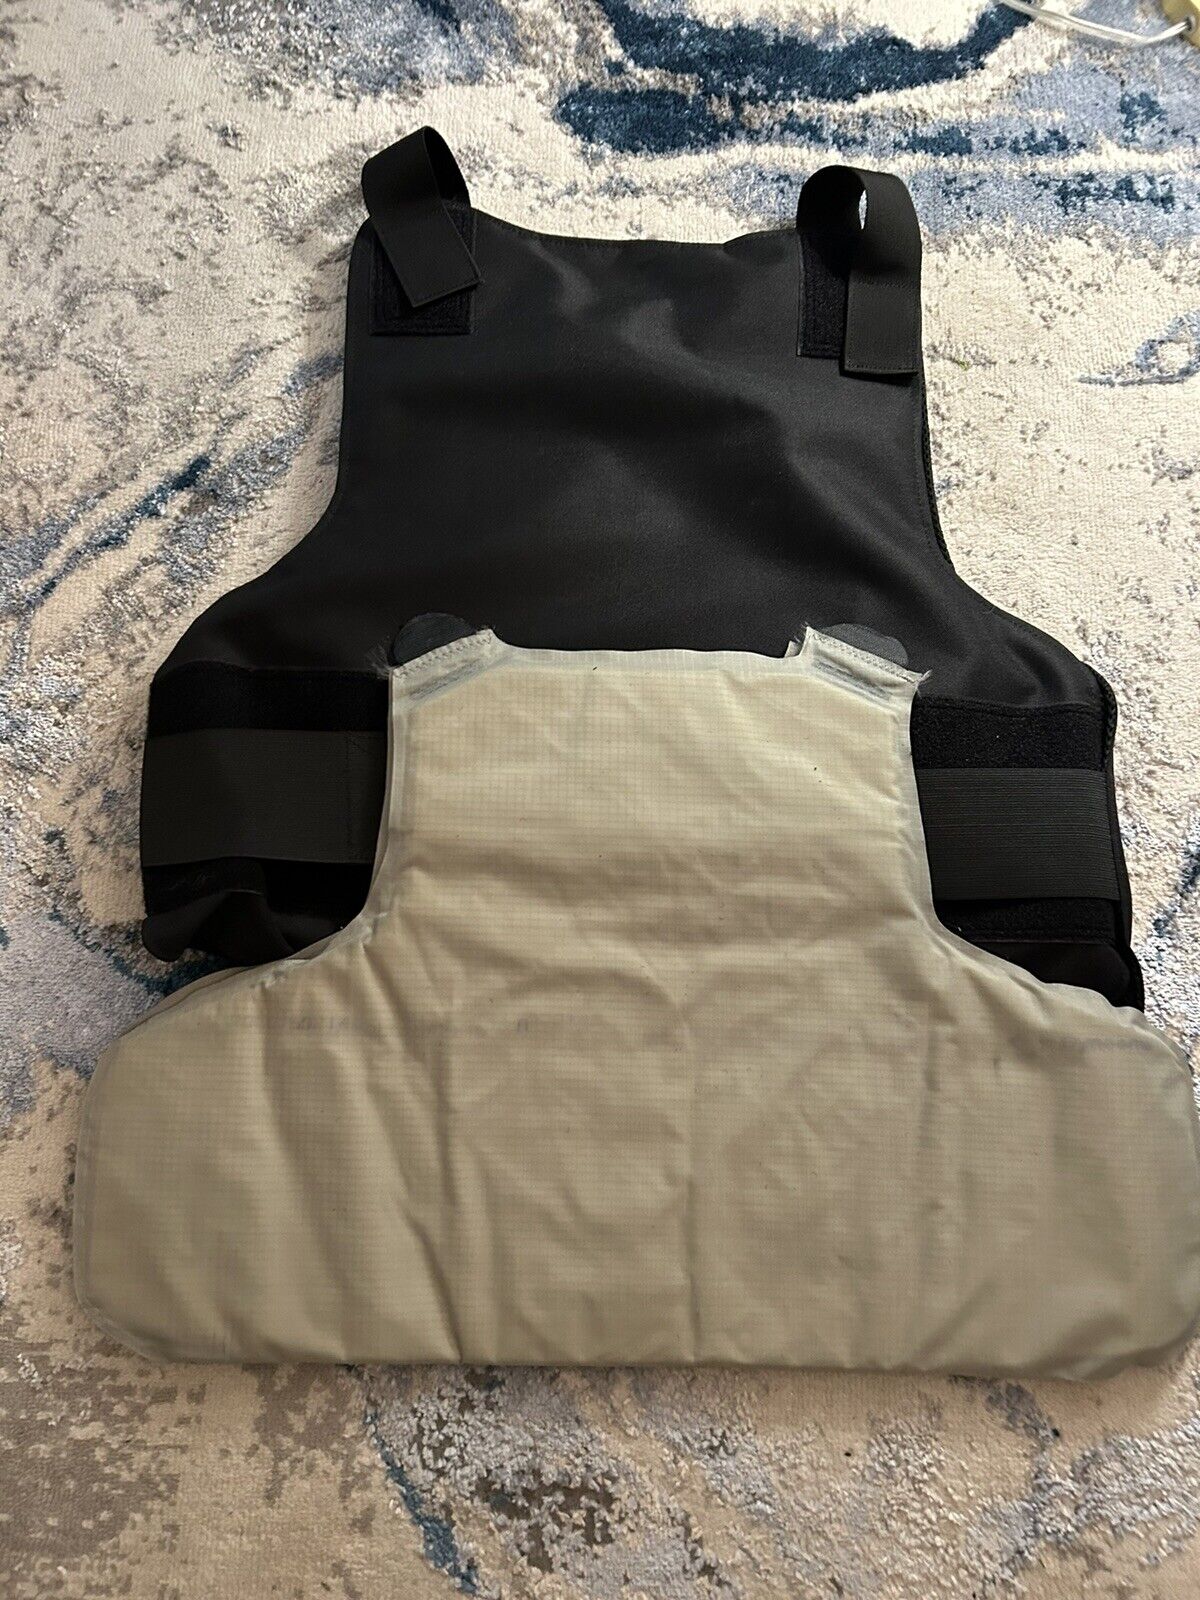 3A EXTRA LARGE - Point Blank ARMOR - KIT - Front/Back And VEST  Rated For 9-44